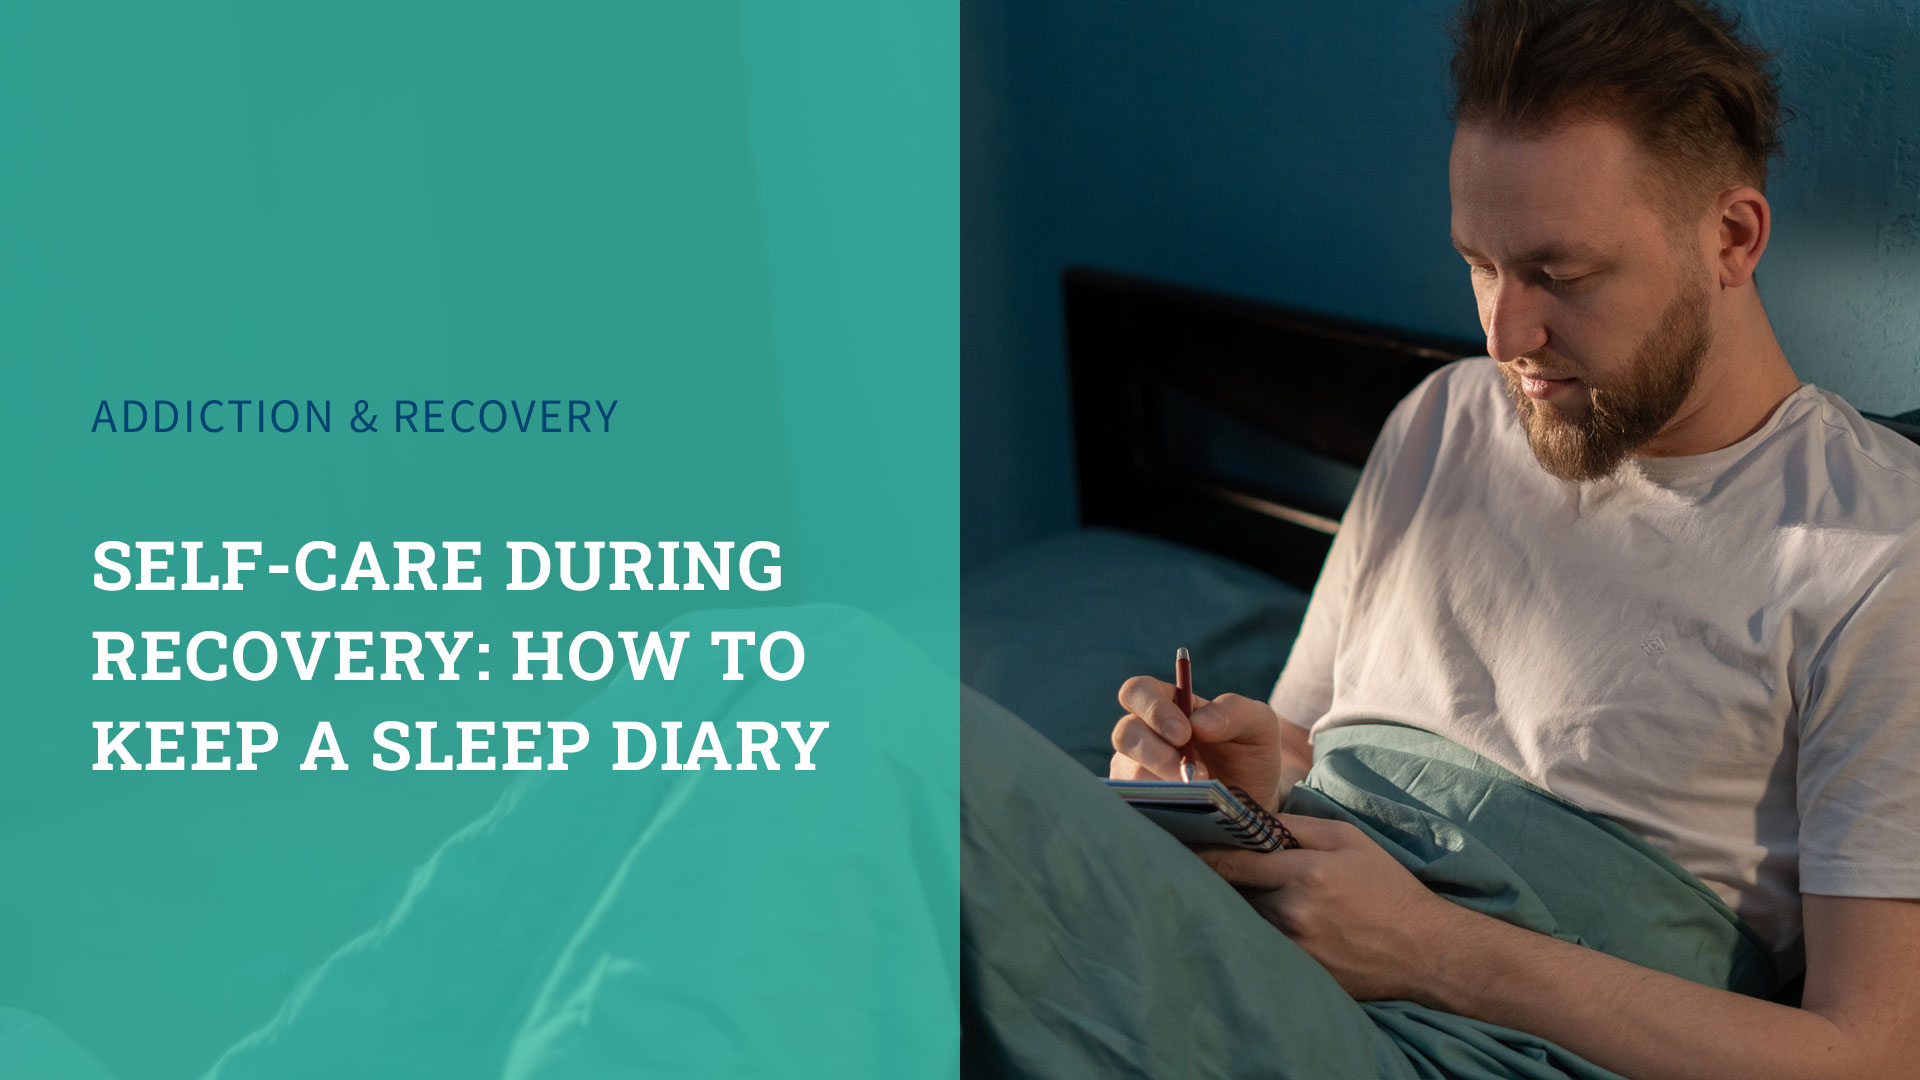 Self-Care During Recovery: How to Keep a Sleep Diary